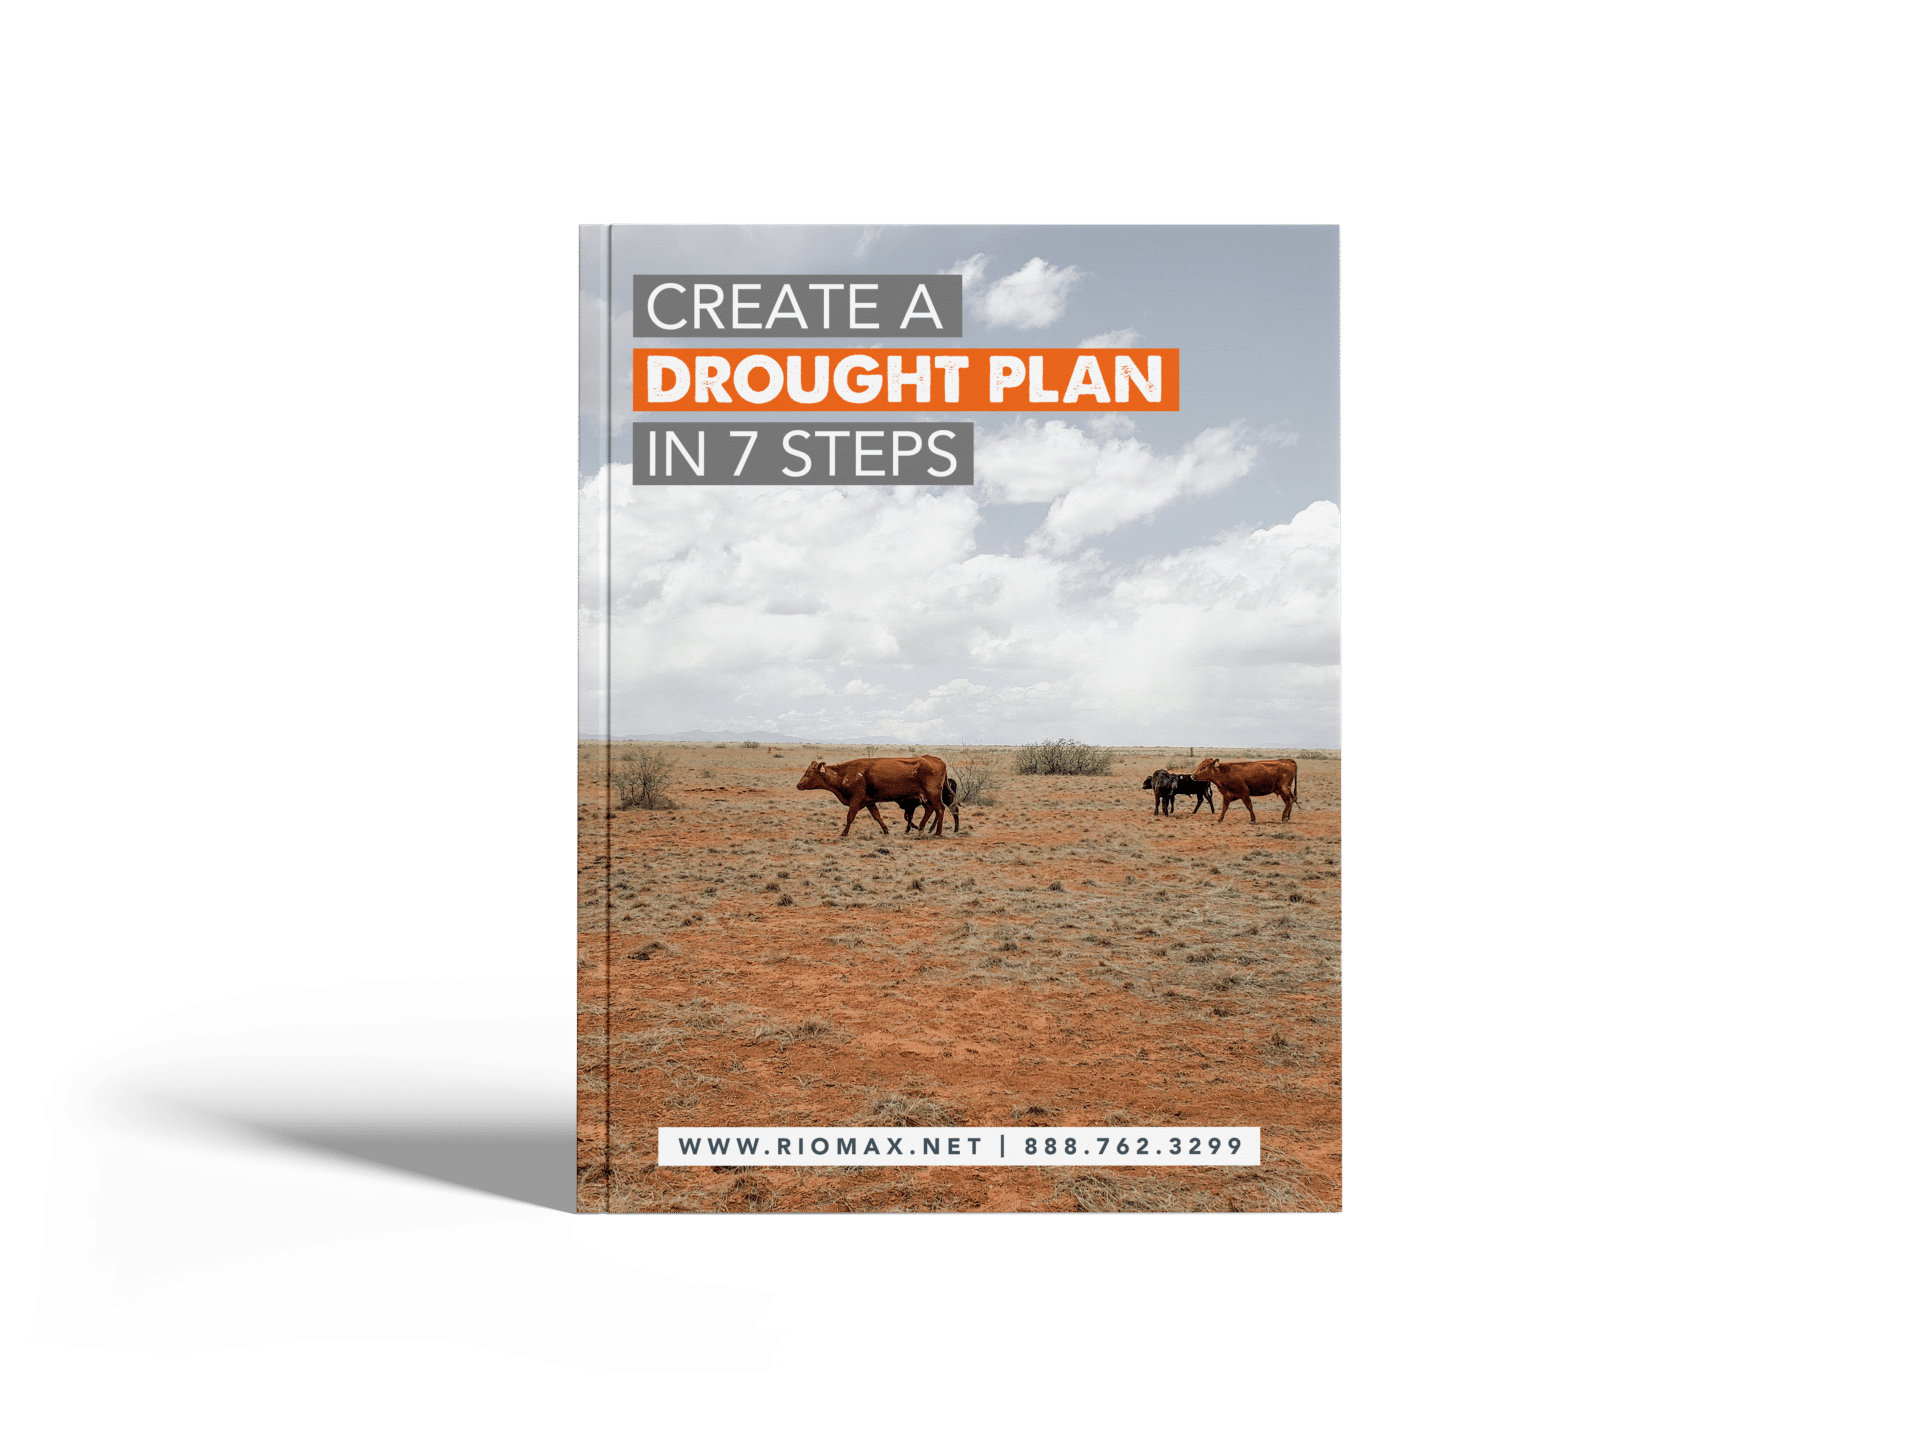 Create_A_Drought_Plan_in_7_Steps_Mockup